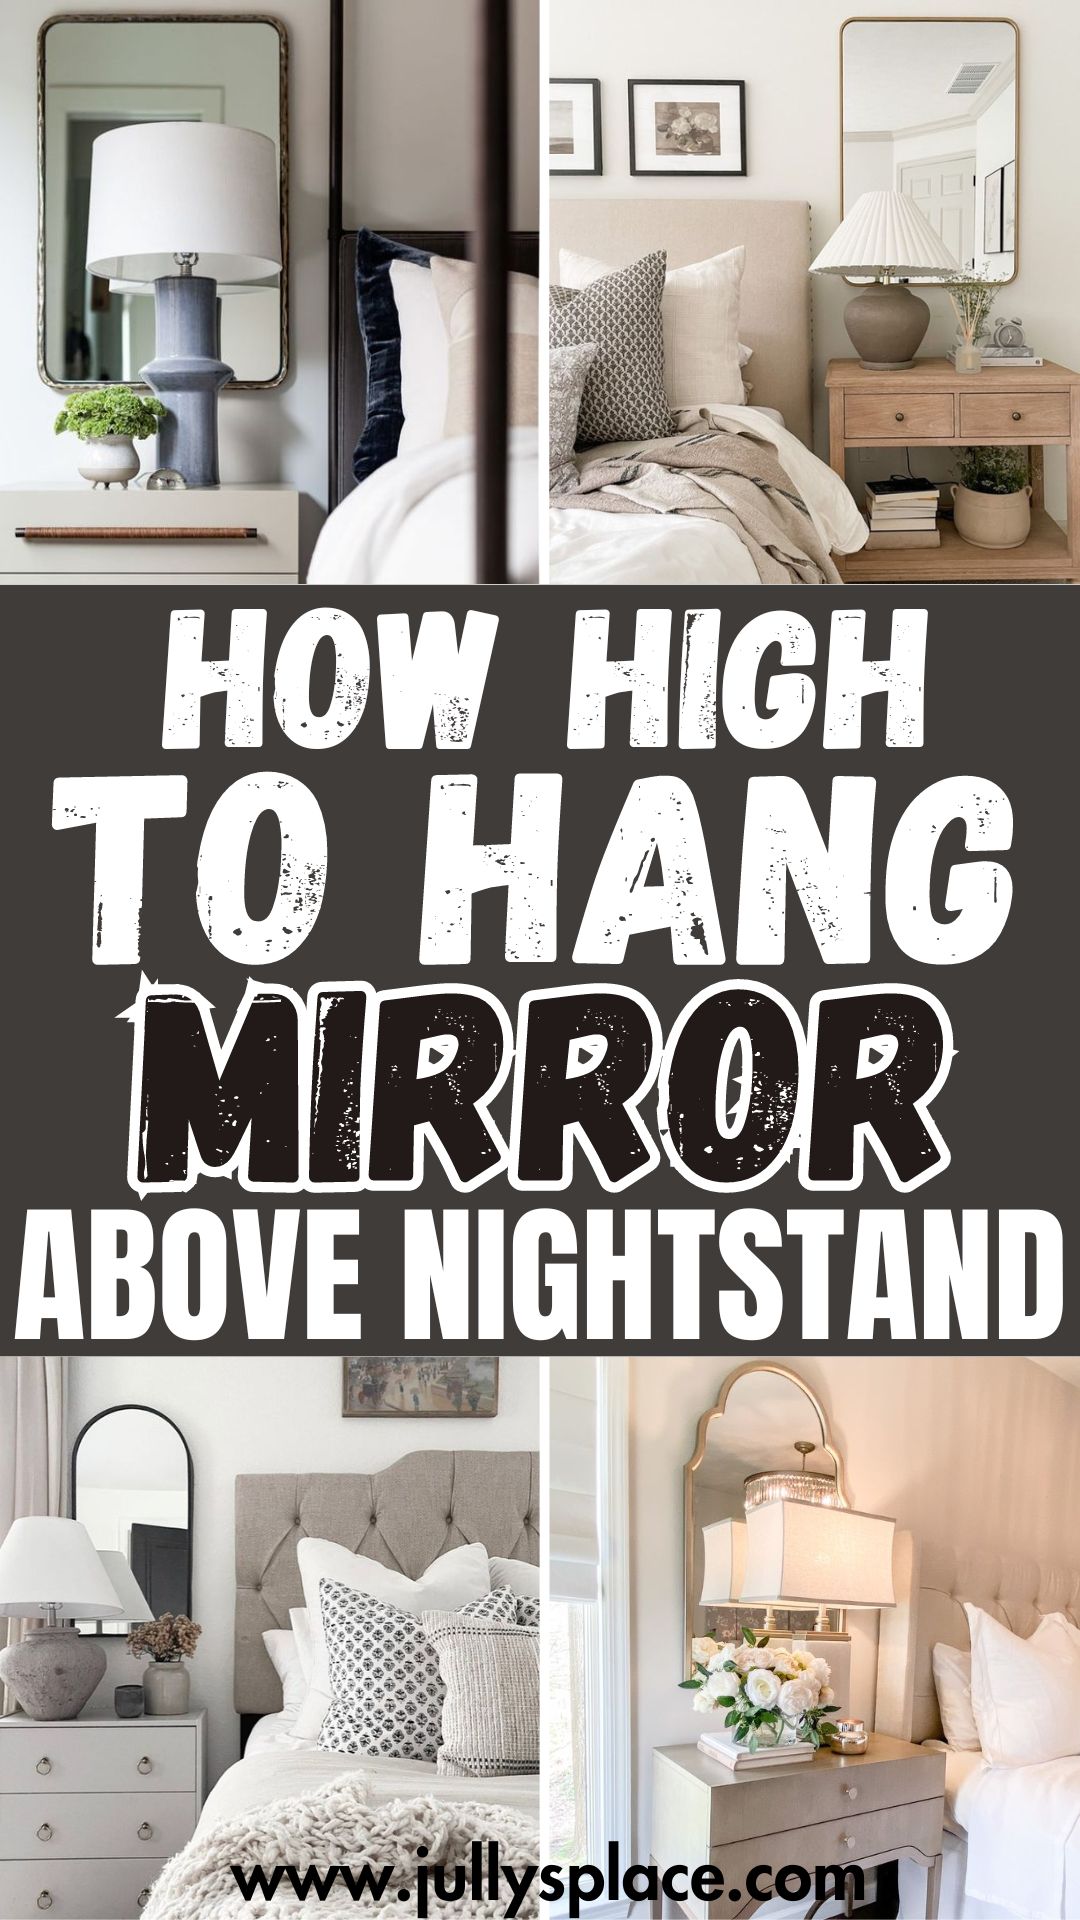 How High To Hang Mirror Over Nightstand? Step By Step Guide